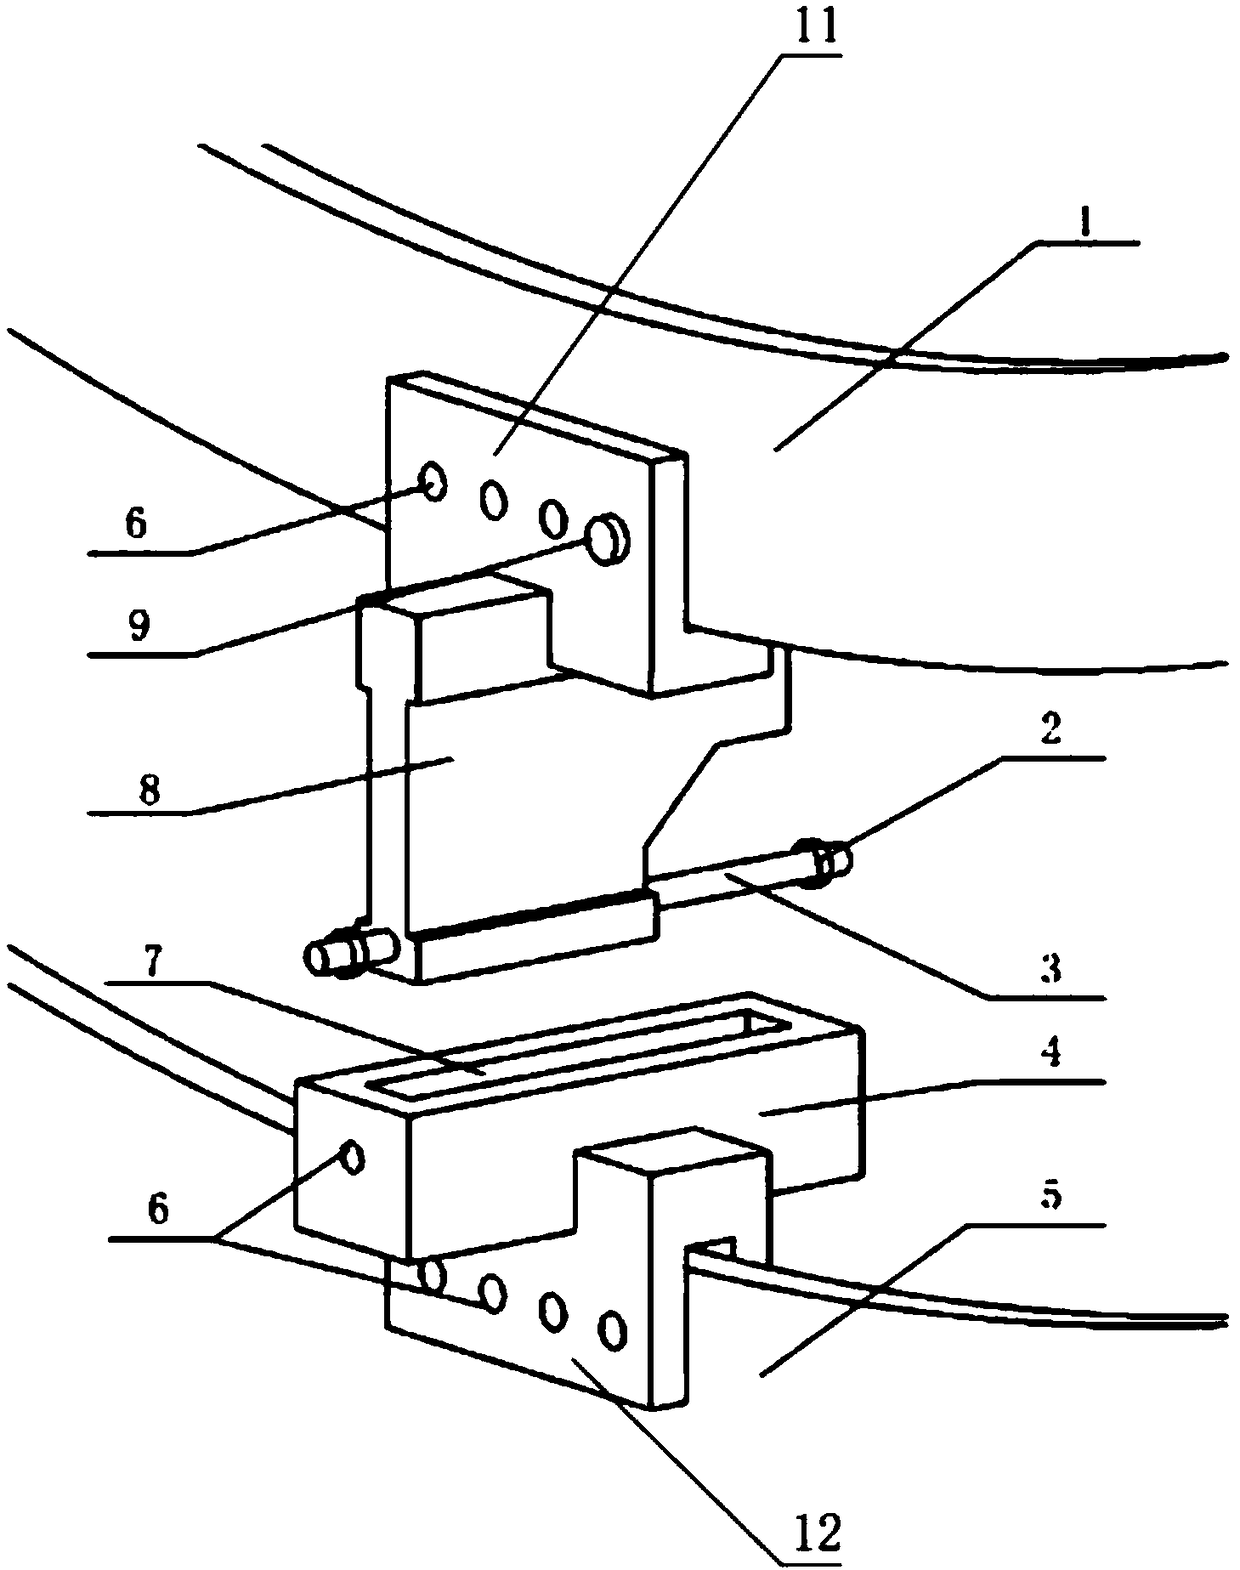 Connecting joint for pressure-resisting body and framework of deep-sea platform